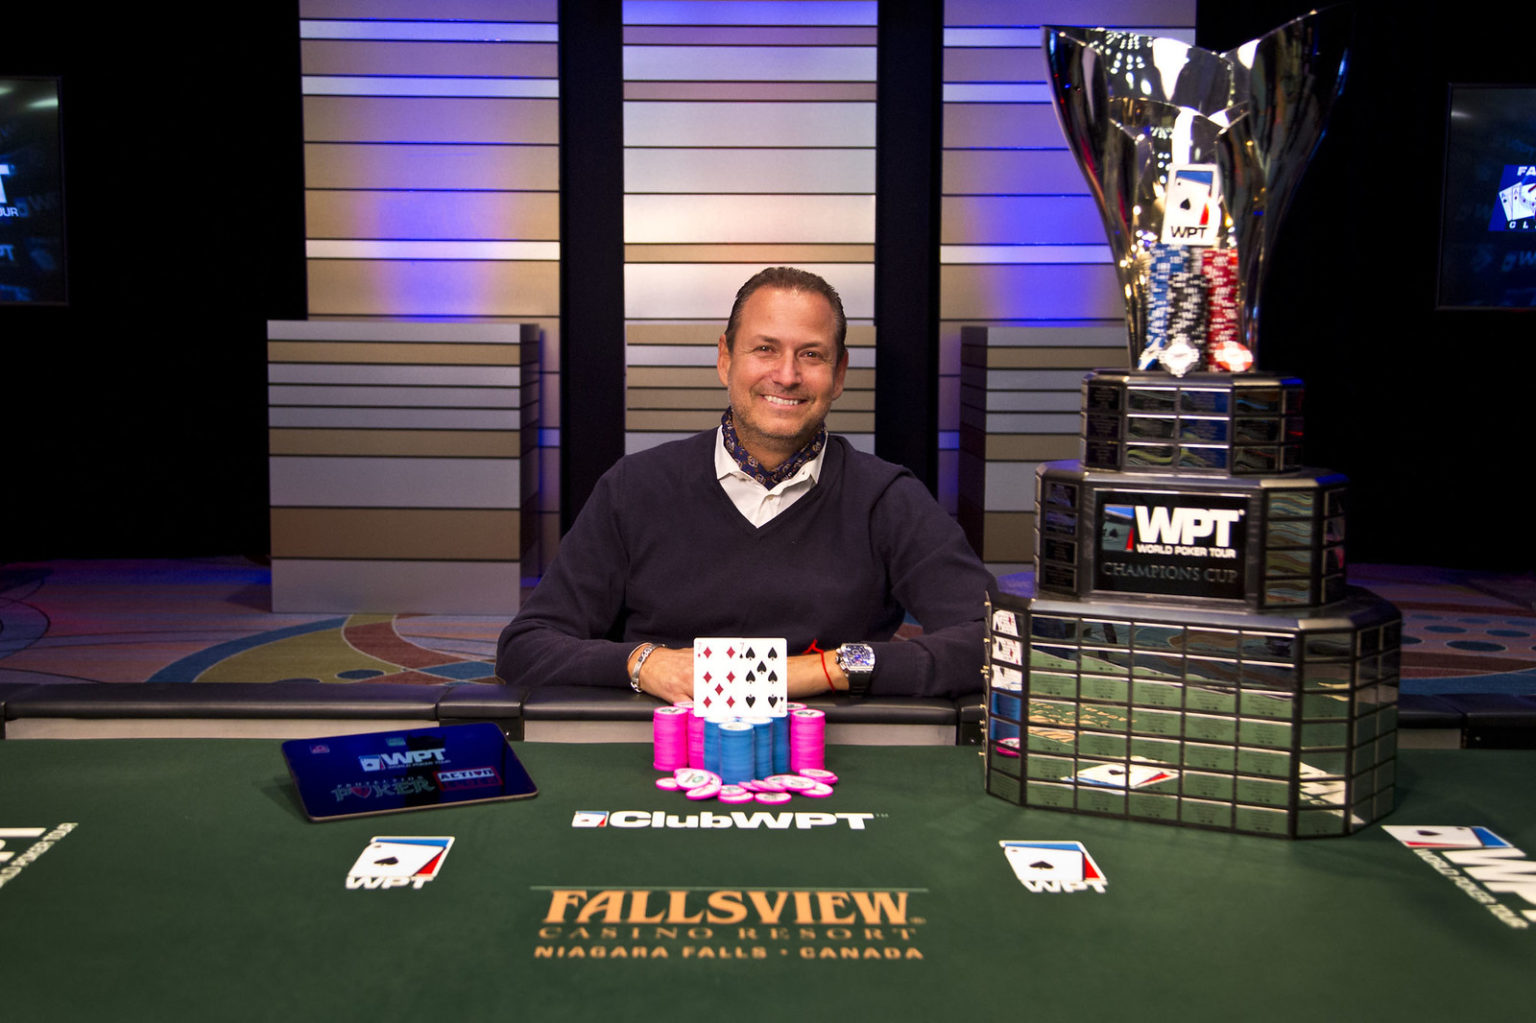 WPT Fallsview Poker Classic Eric Afriat Joins The Triple Title WPT